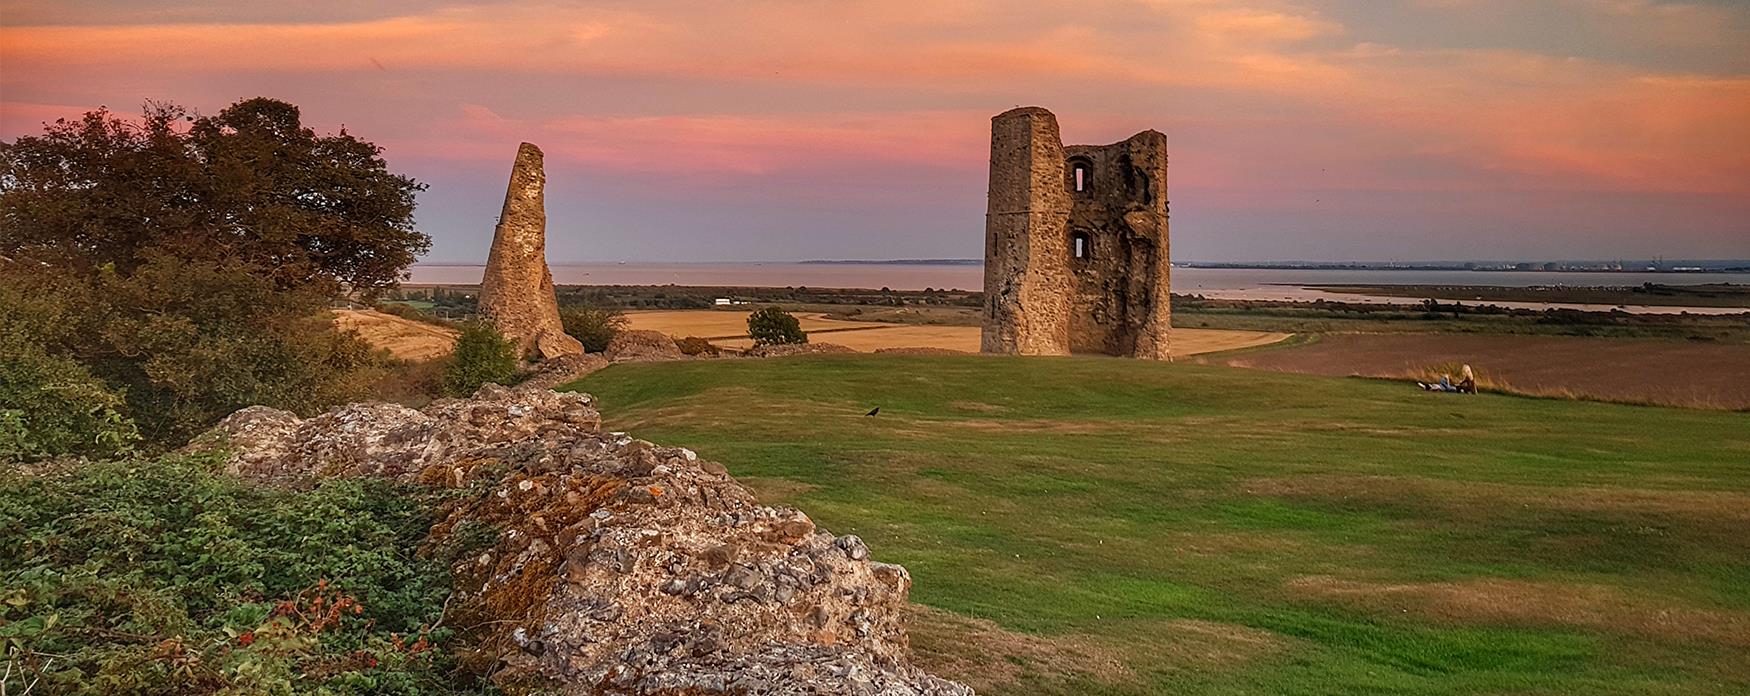 Castle Ruins at Sunset